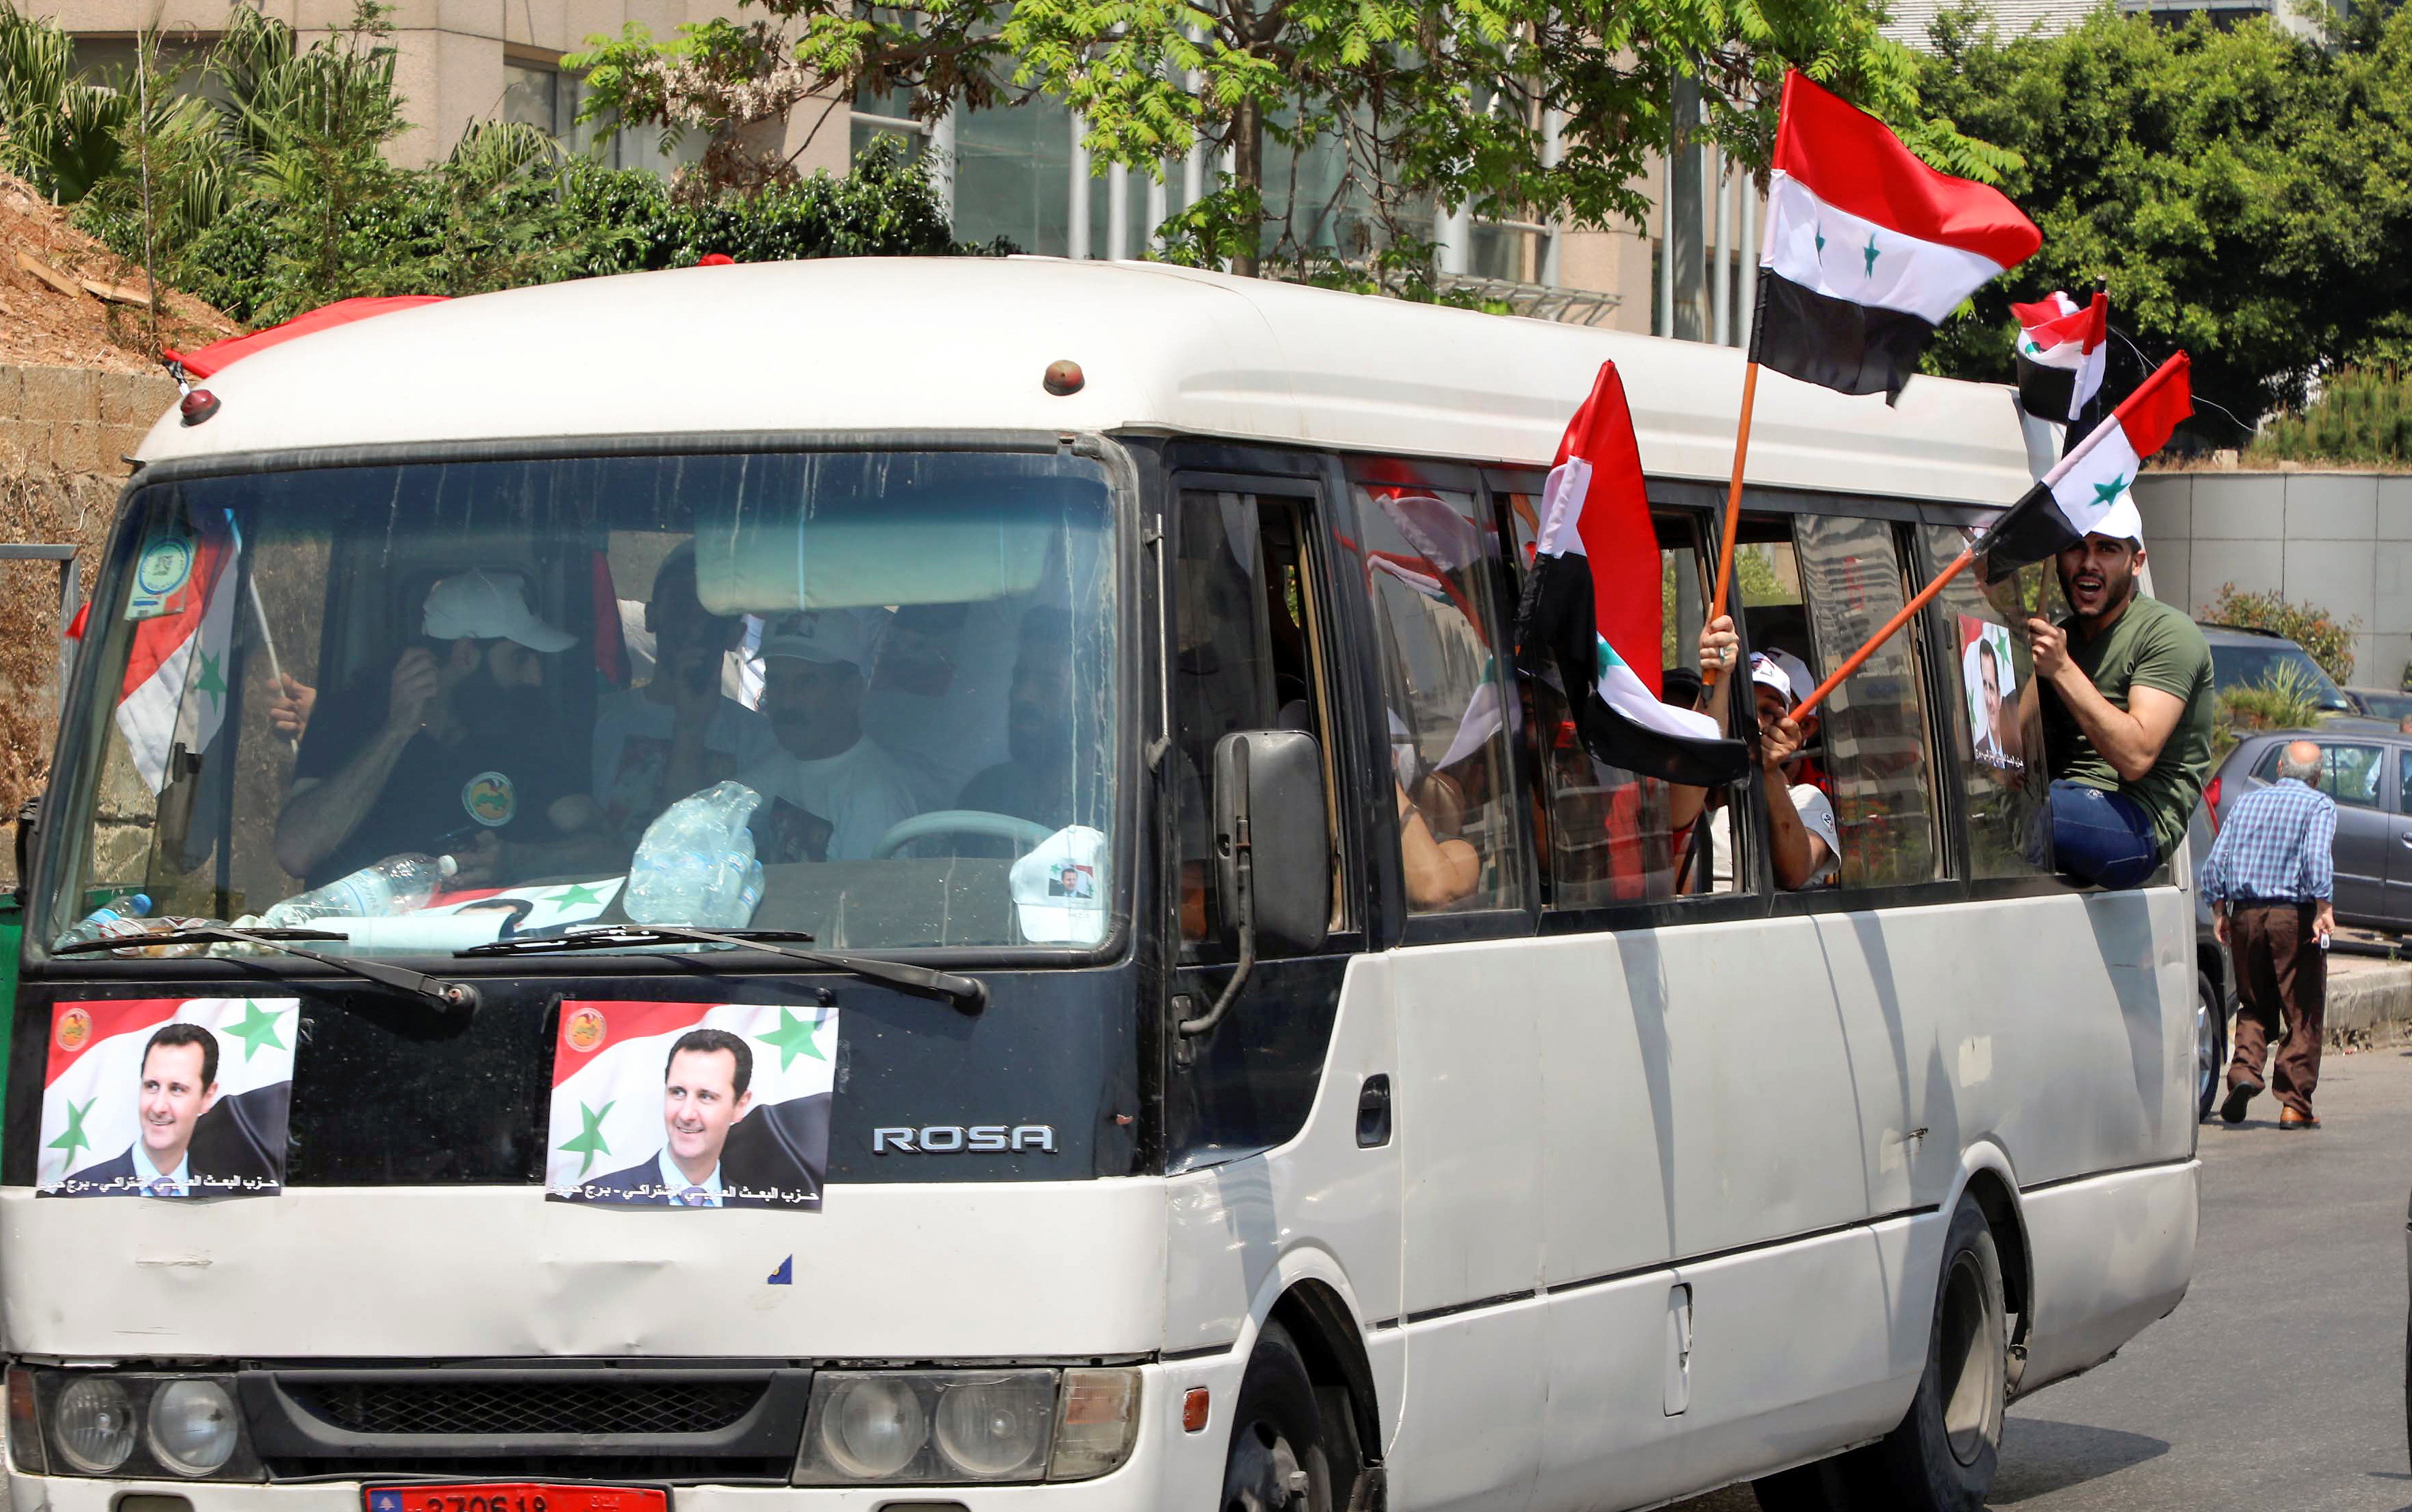 Pictures of Syrian President Bashar al Assad are seen on a bus in Beirut